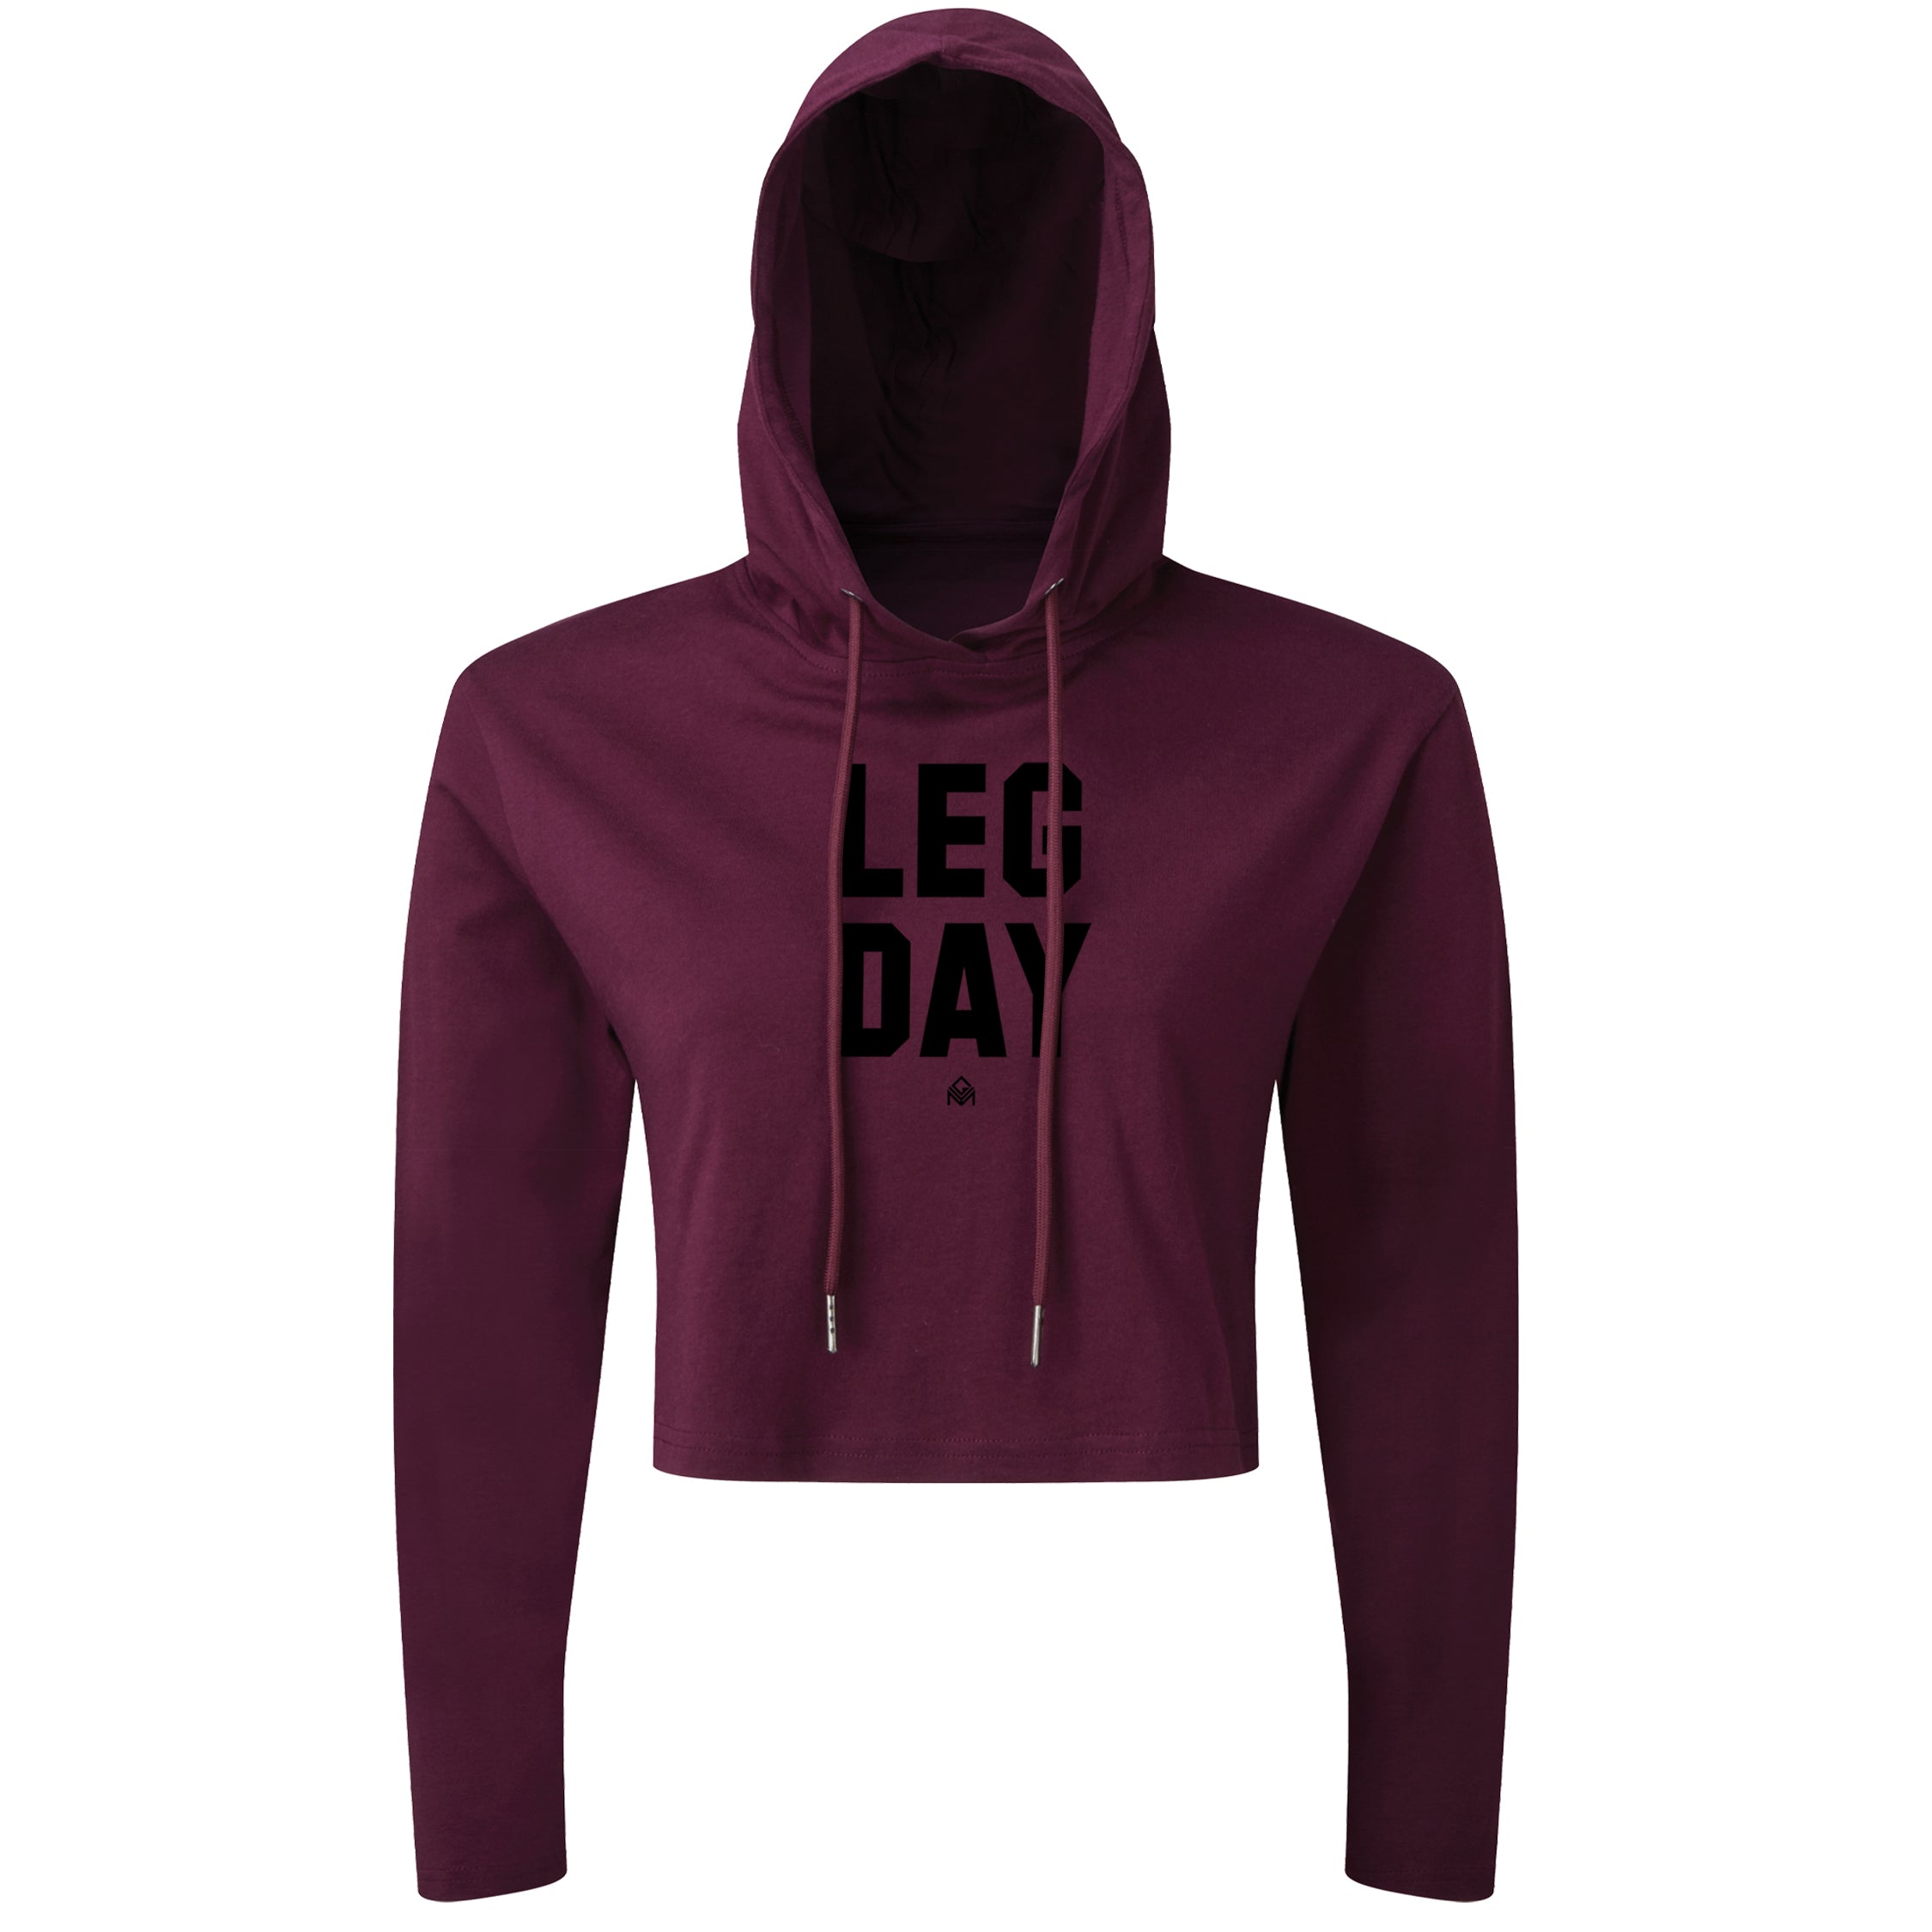 LEG DAY - Cropped Hoodie